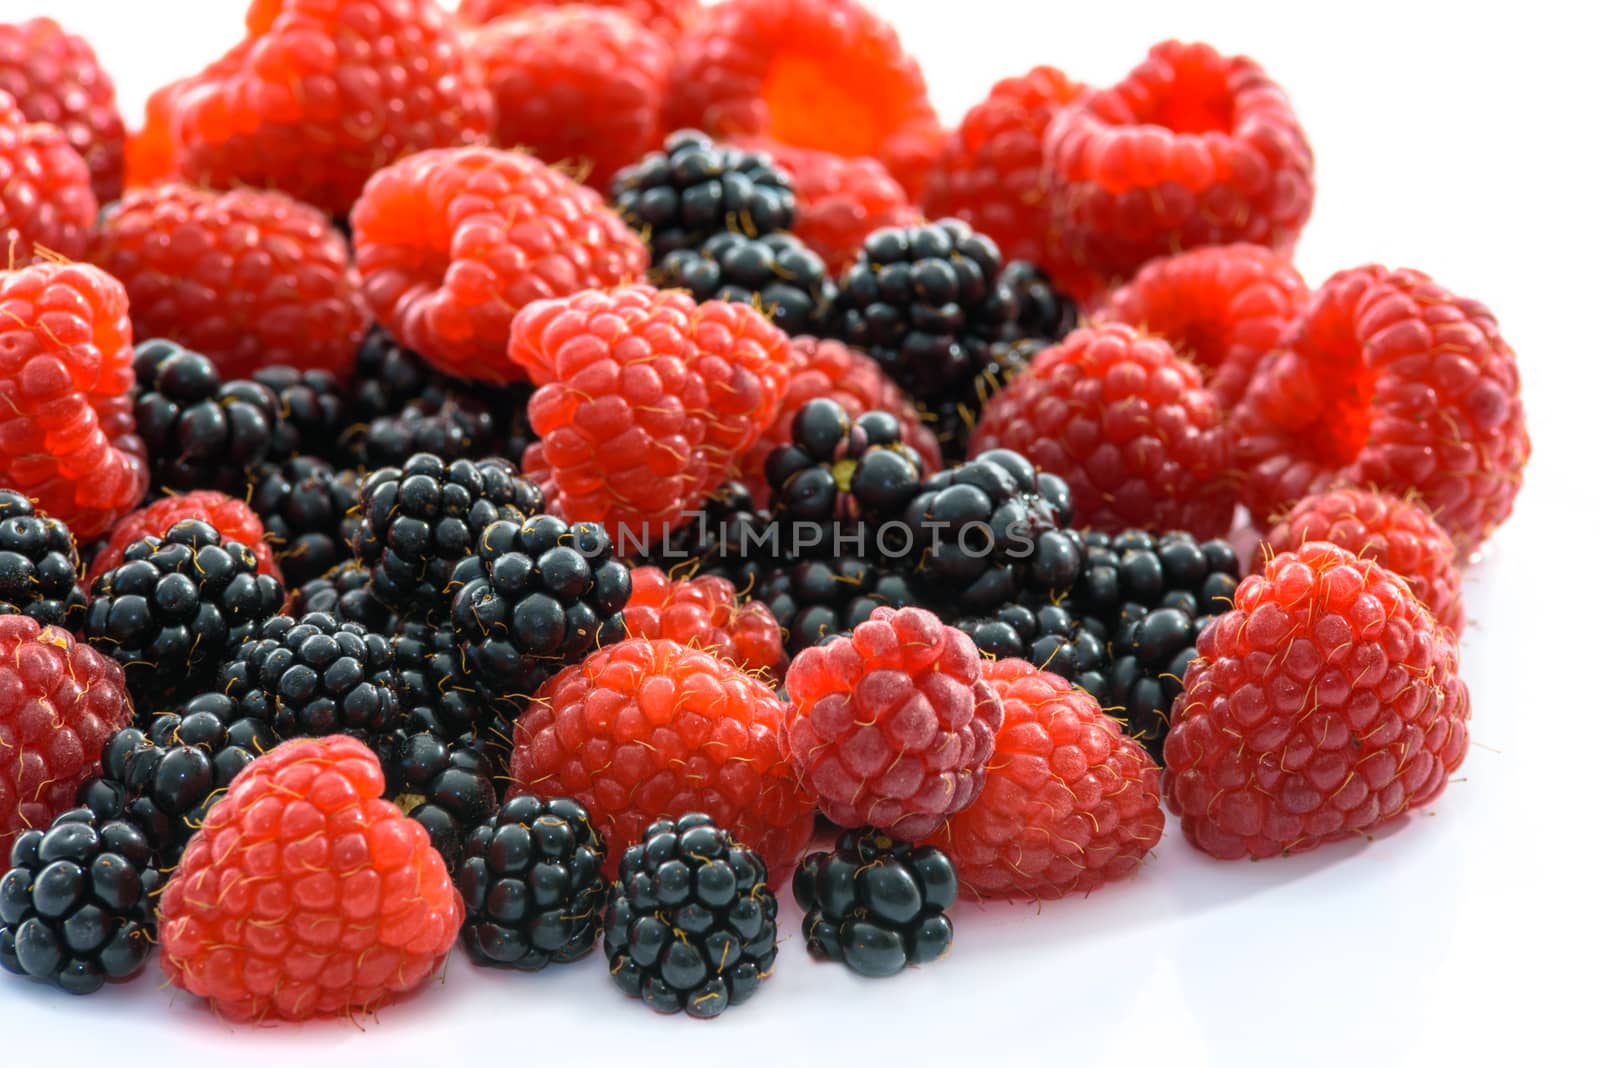 Raspberries and blackberries scattered on a white background